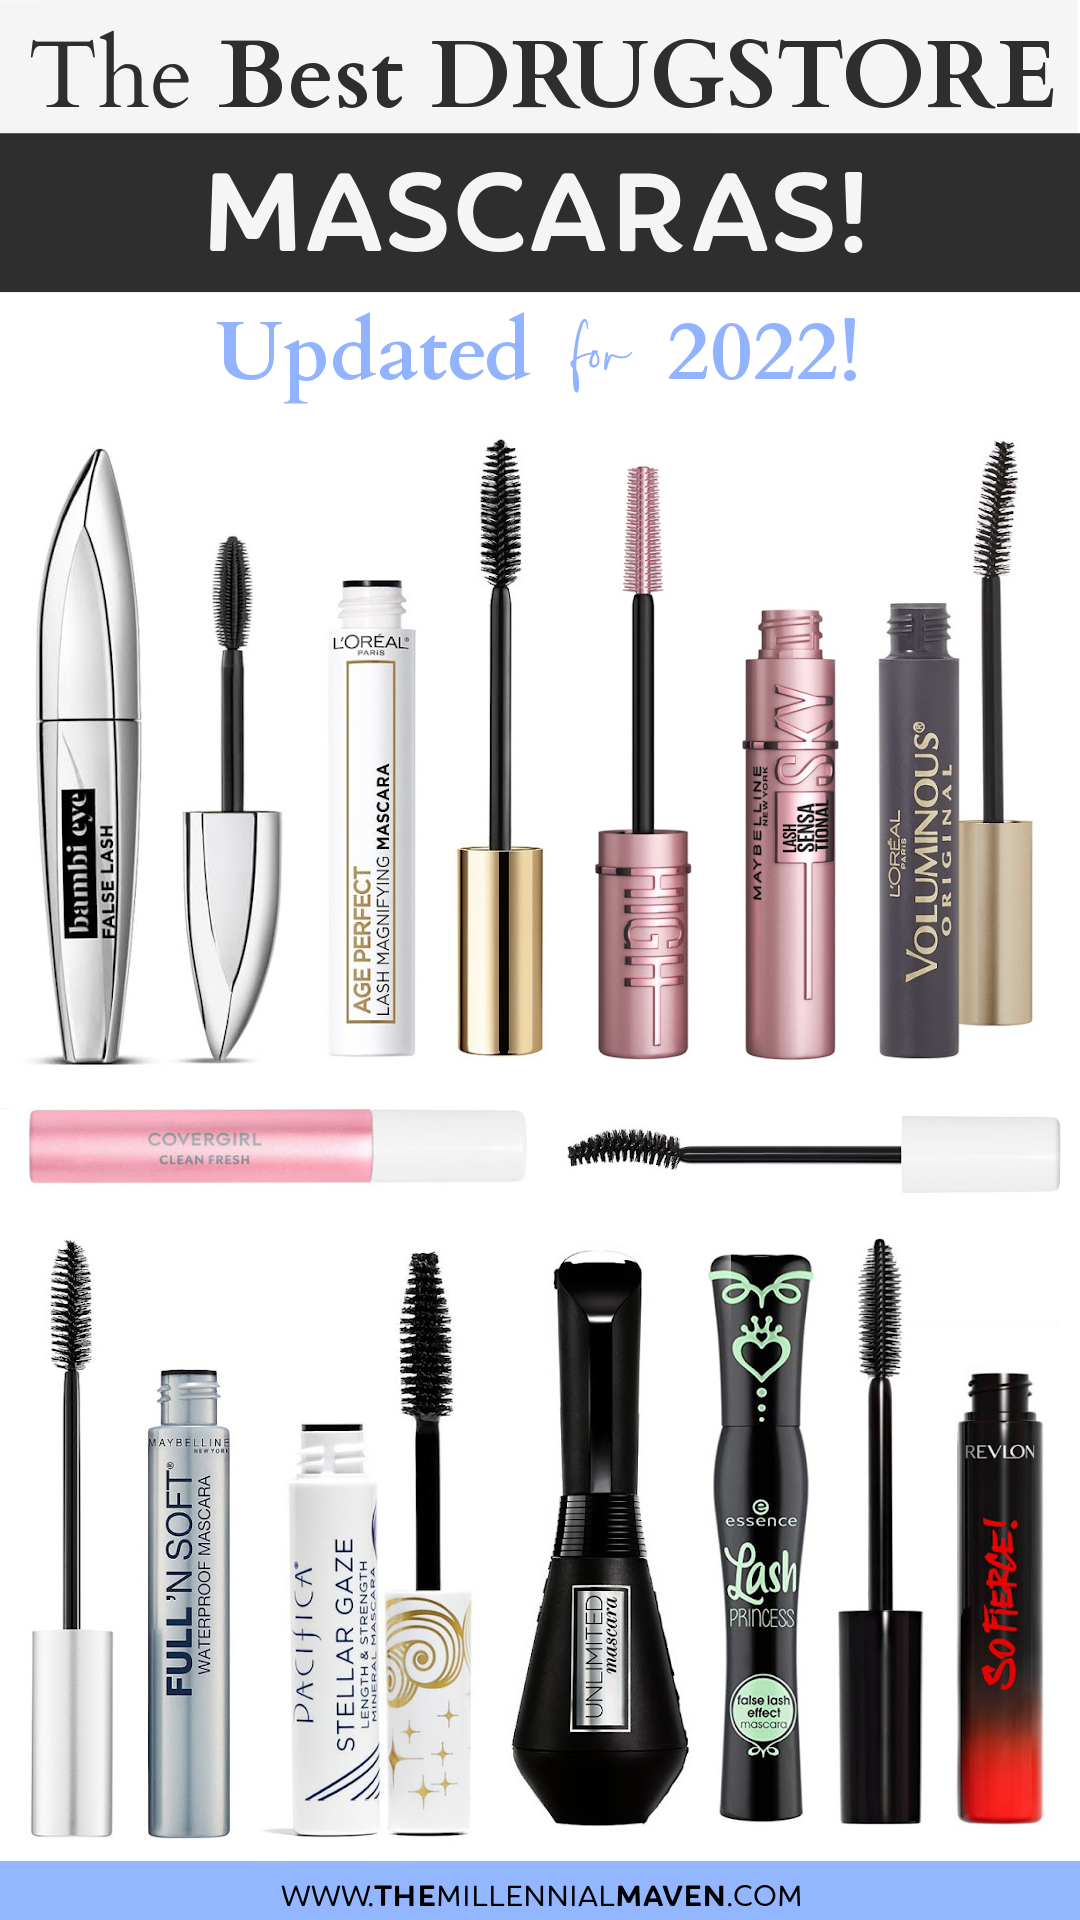 Top 10 Best Mascaras at the Drugstore in 2022! | Drugstore Mascaras